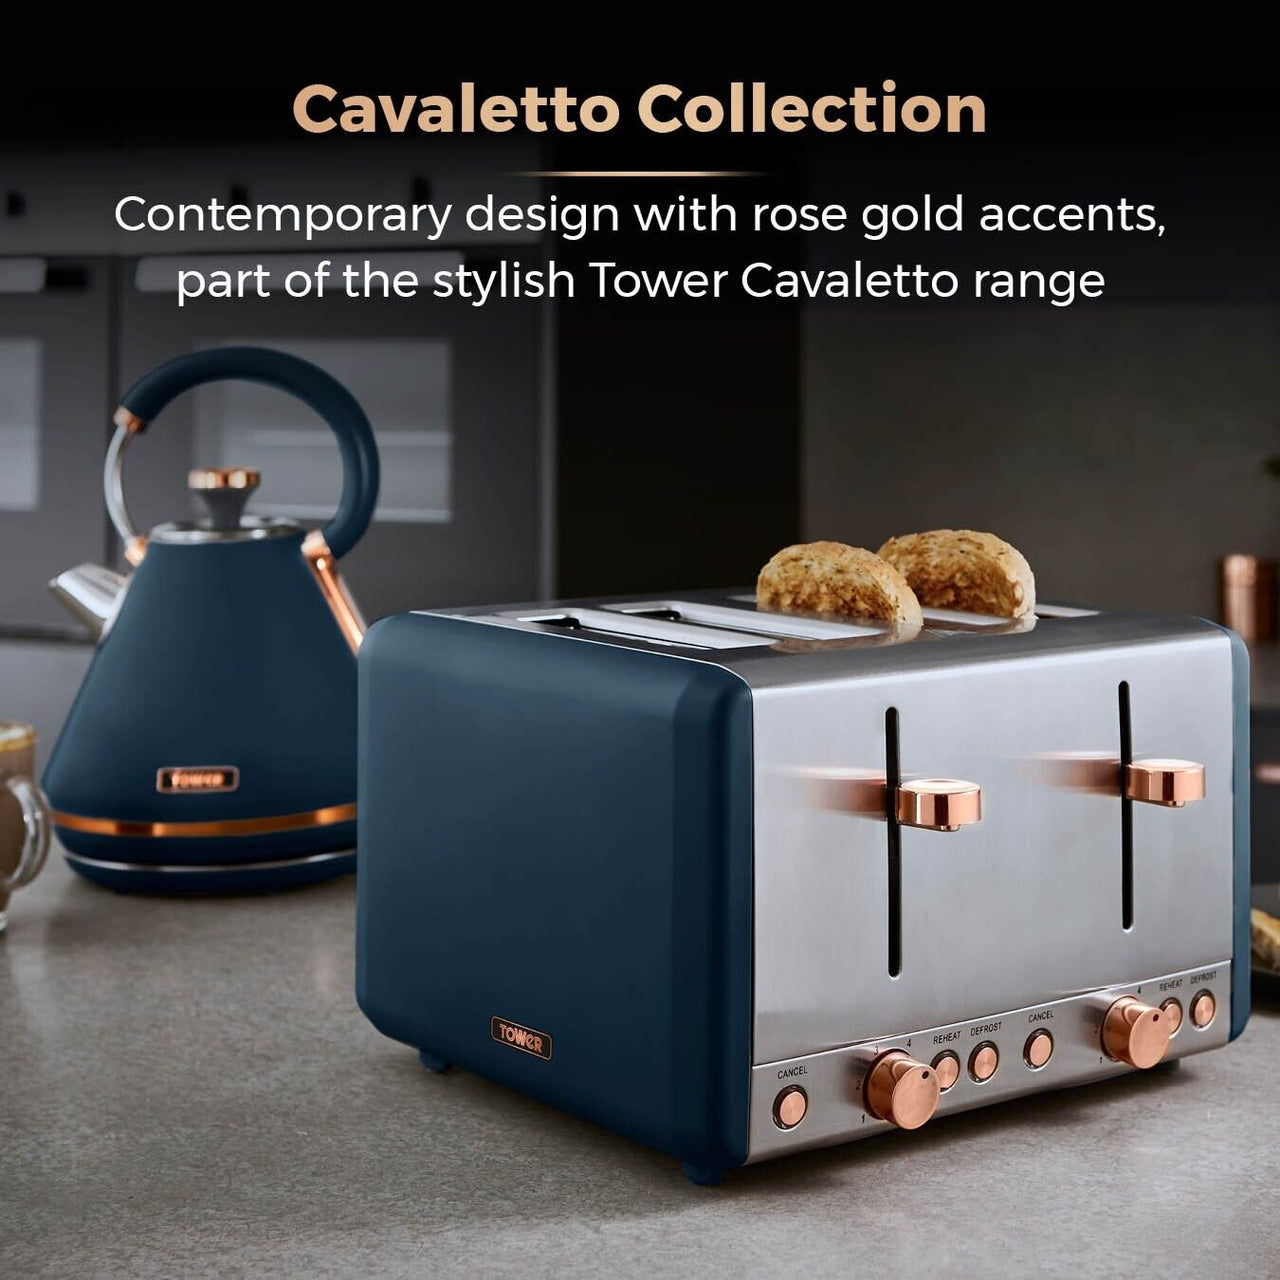 Tower Cavaletto Pyramid Kettle 4 Slice Toaster Canisters Set Blue/Rose Gold